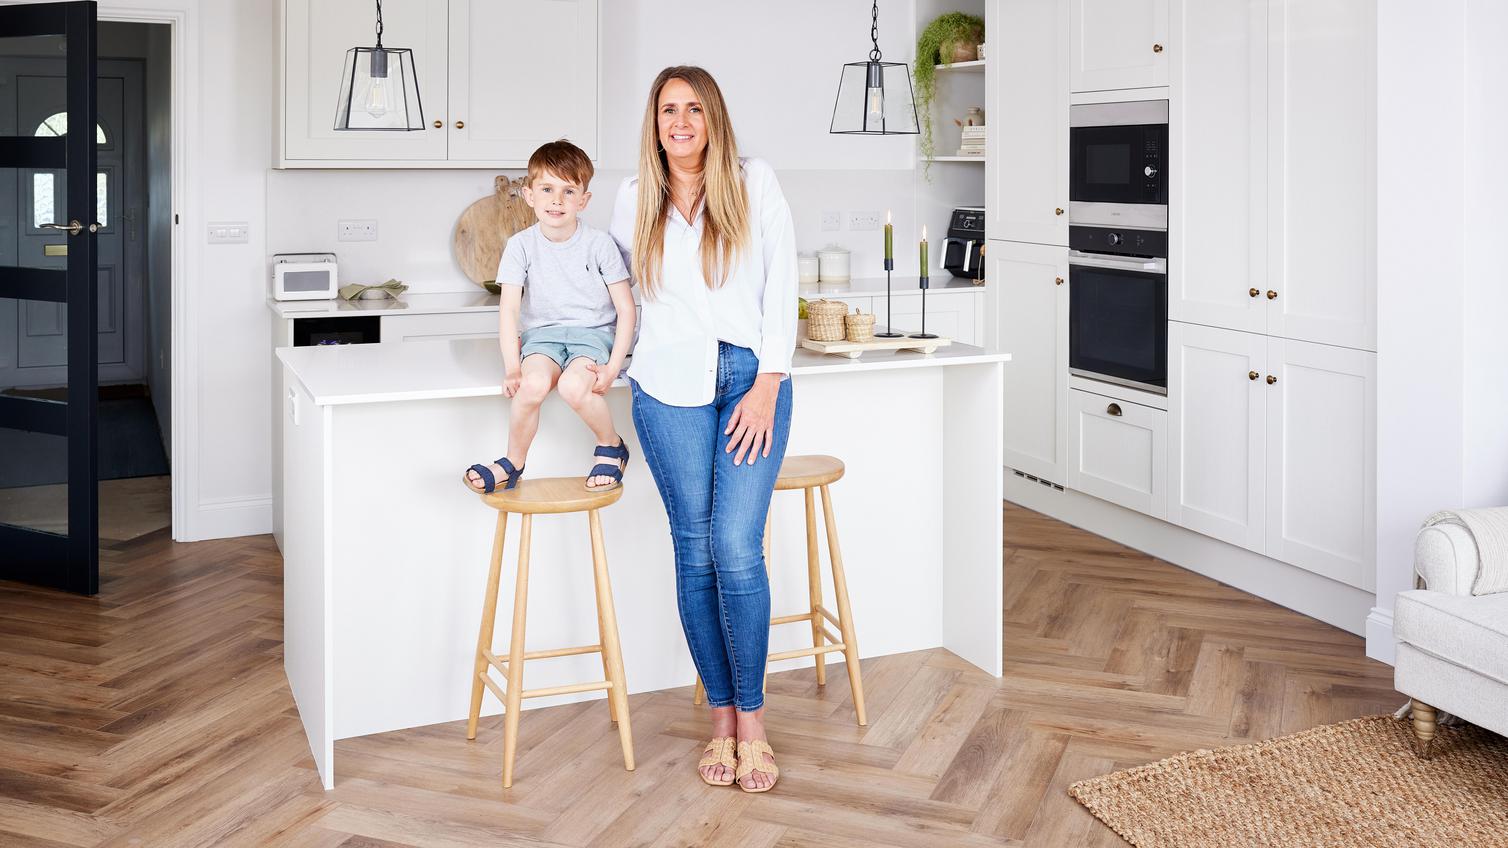 Serena and her son posing next to their kitchen island